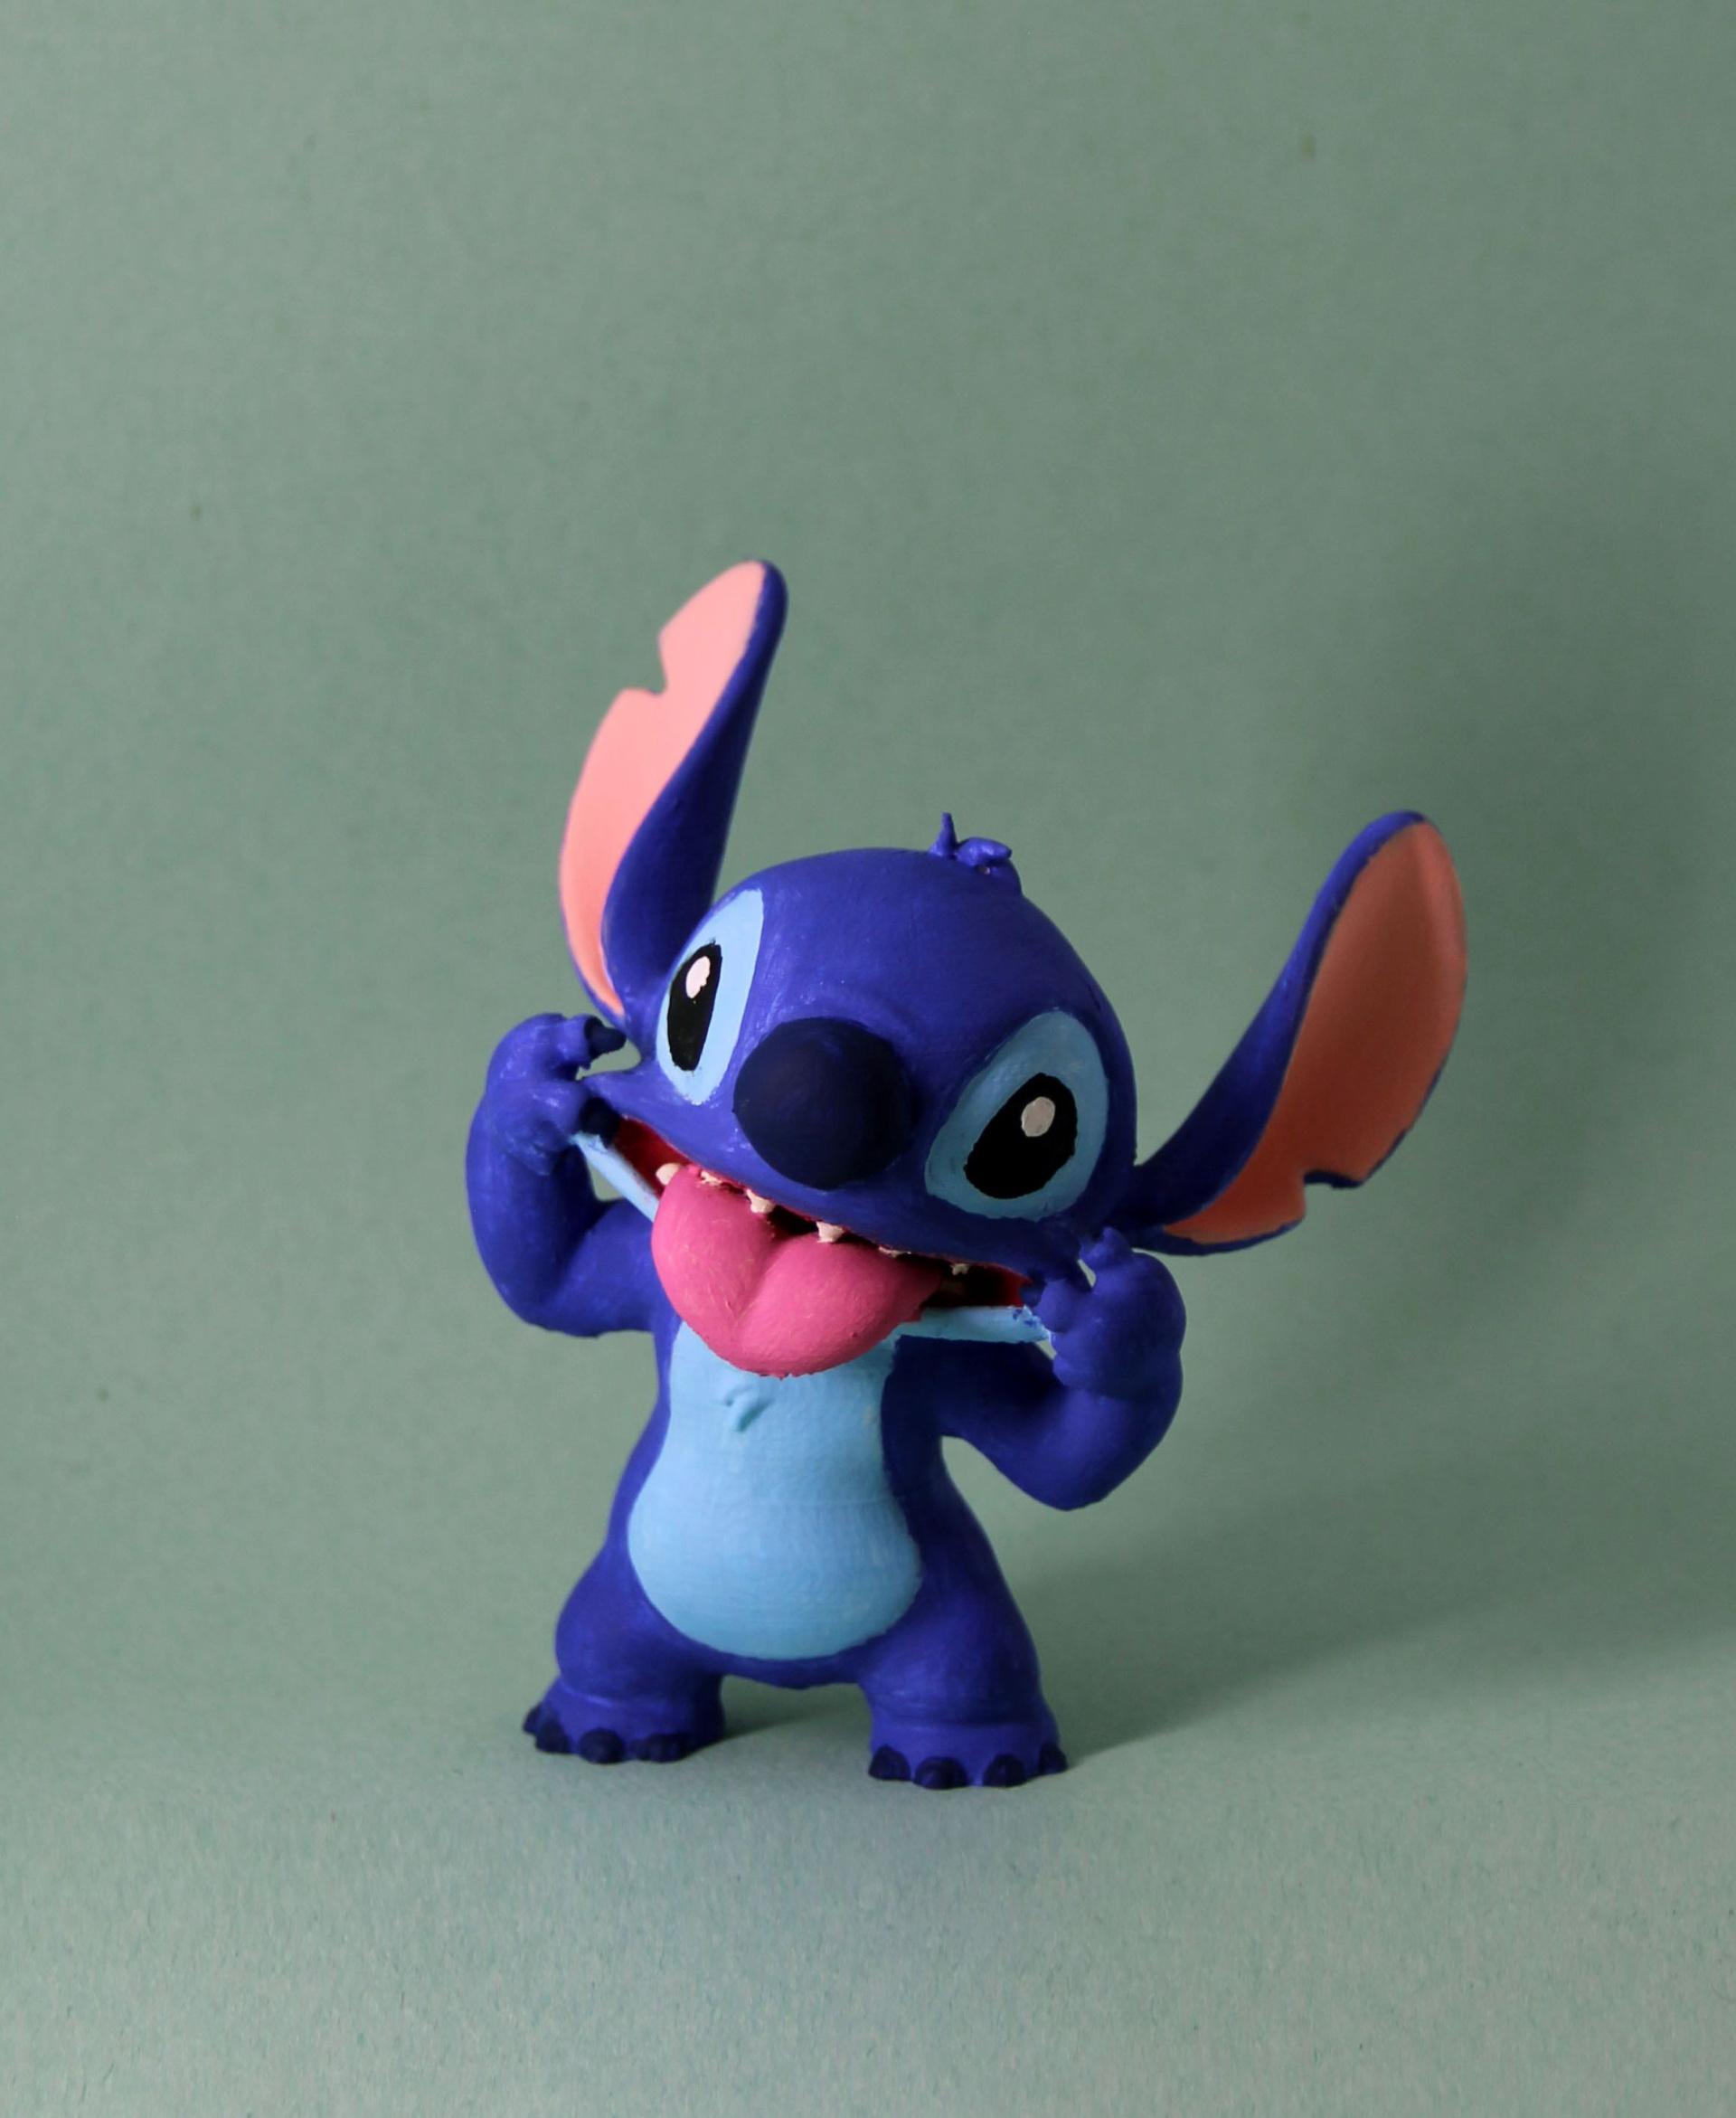 Stitch - Hand painted Stitch. Recommend Prusa slicer for this, Cura lost an arm due to bad supports. - 3d model